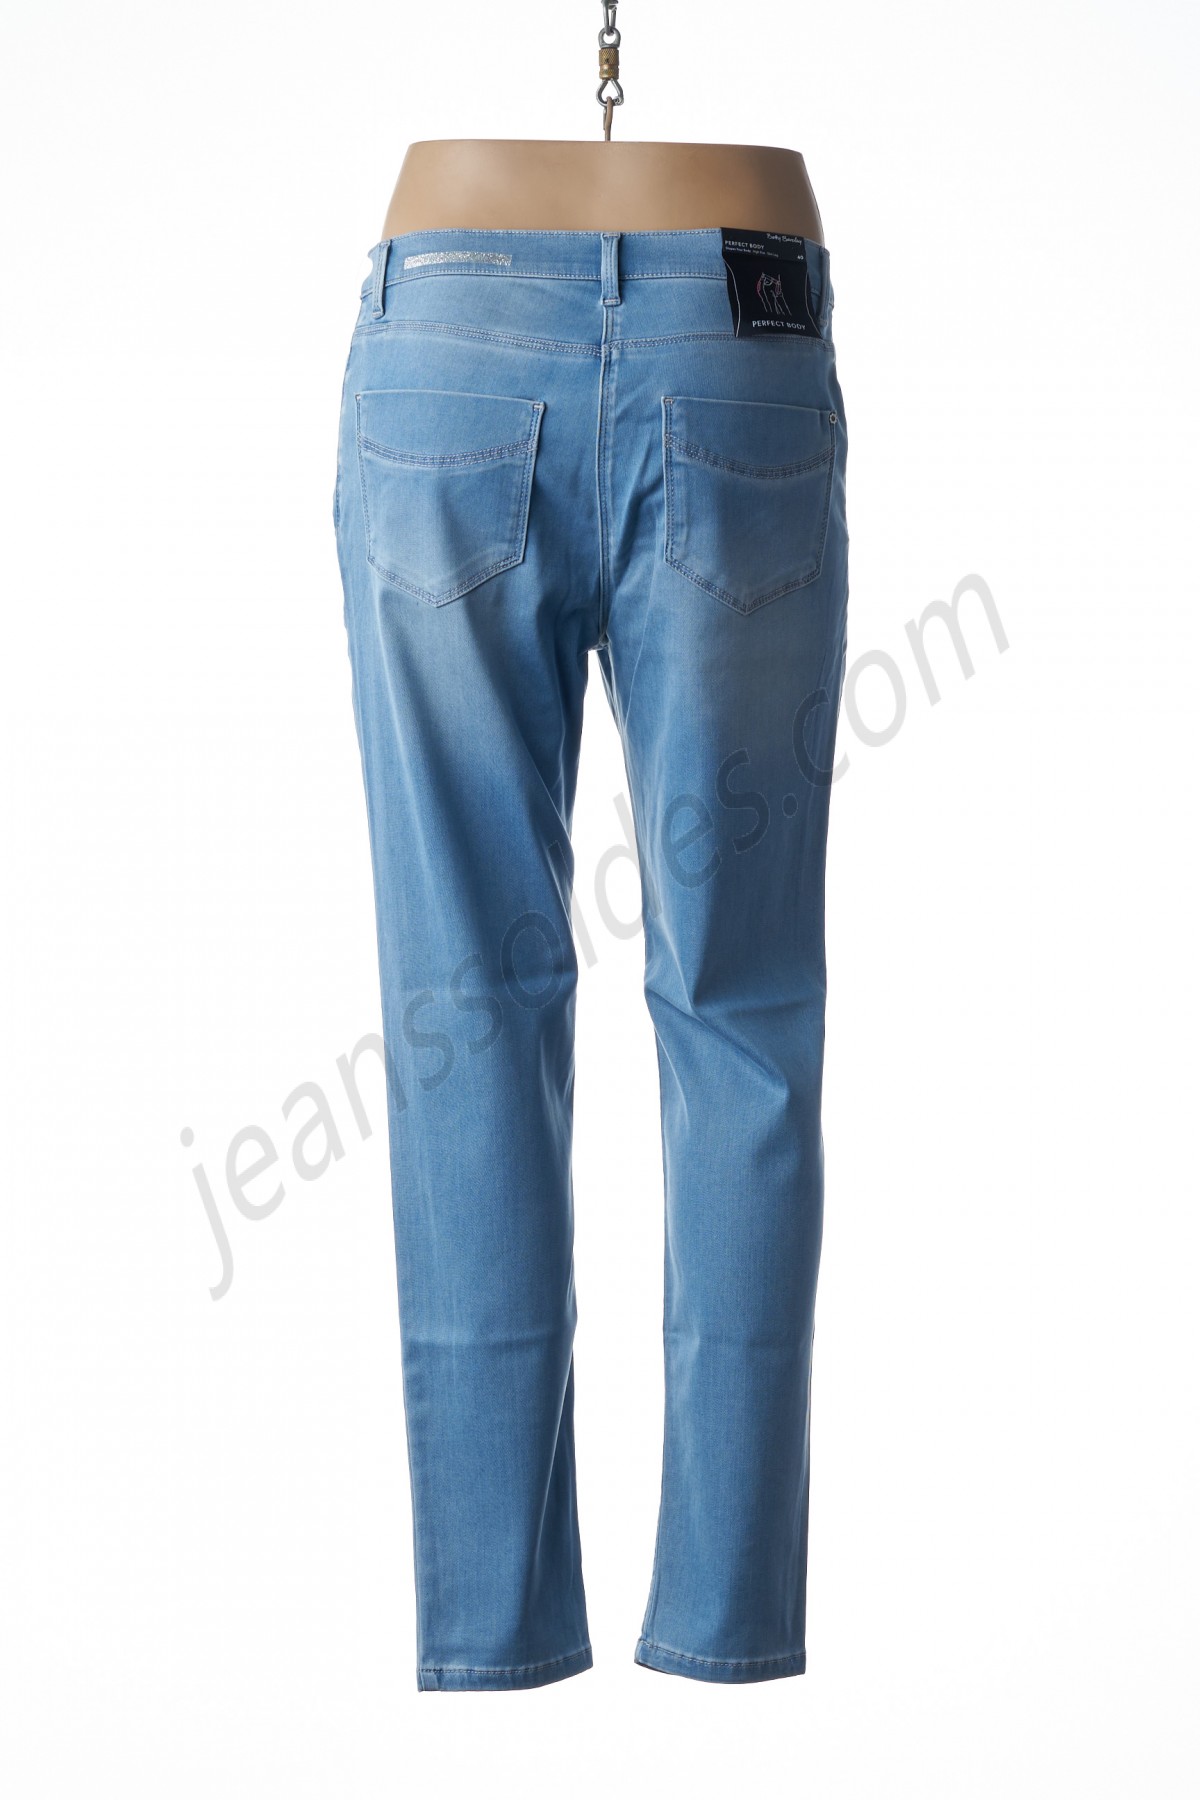 betty barclay-Jeans coupe slim prix d’amis - -1